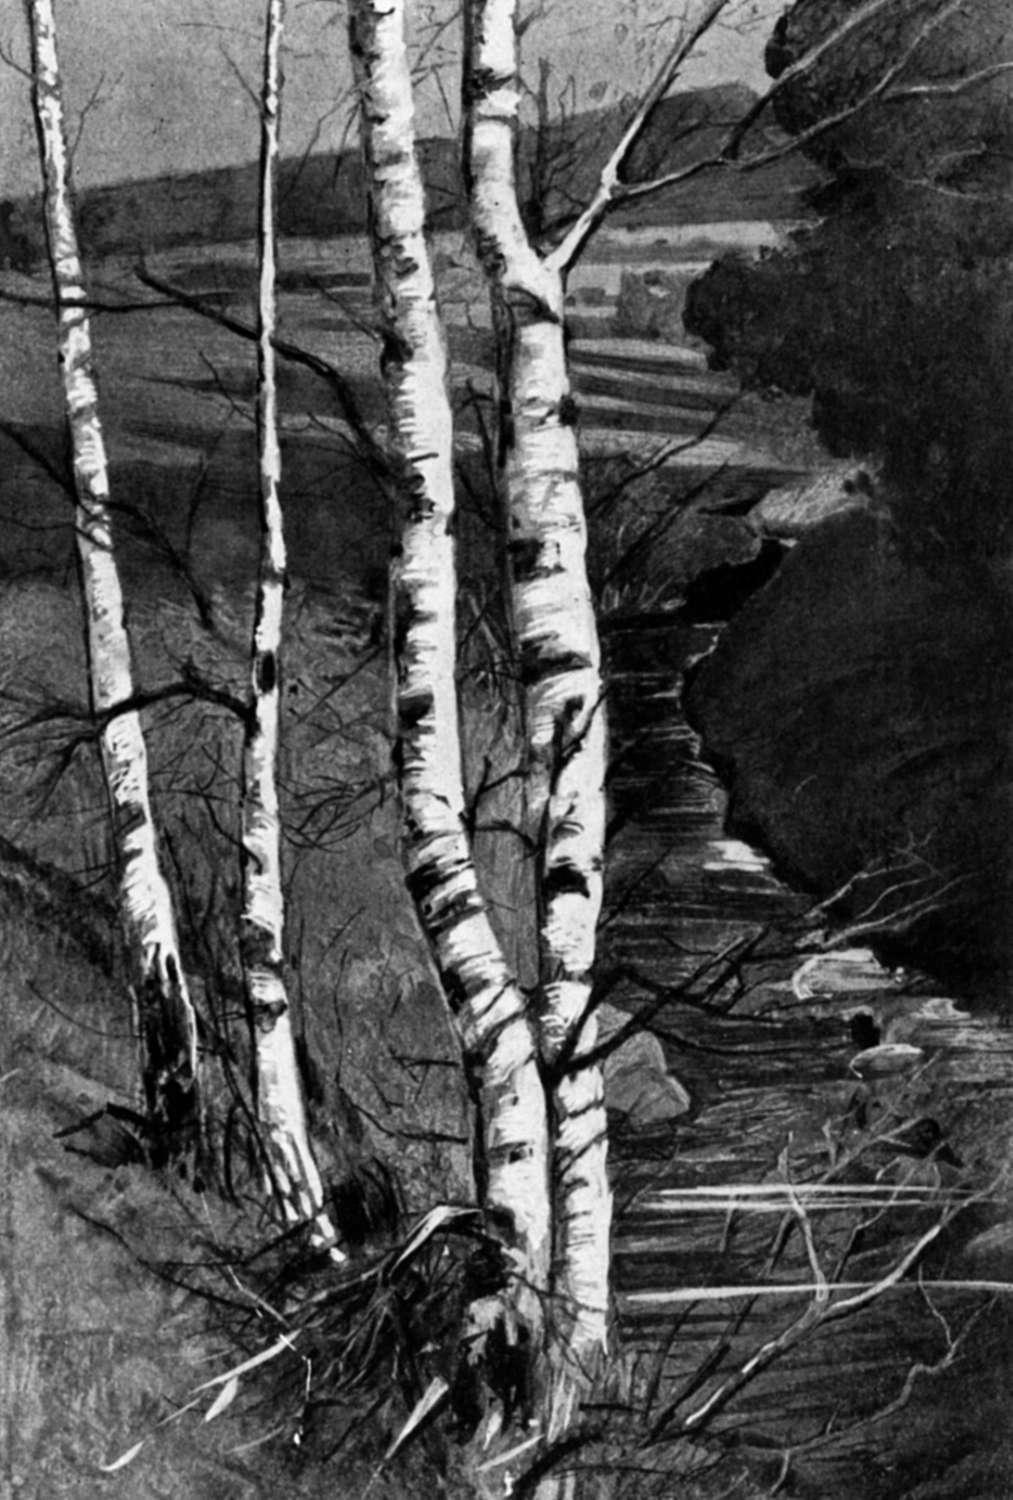 White Birch The white birch tree was very important to Native American tribes living in the Northeast region of the United States.